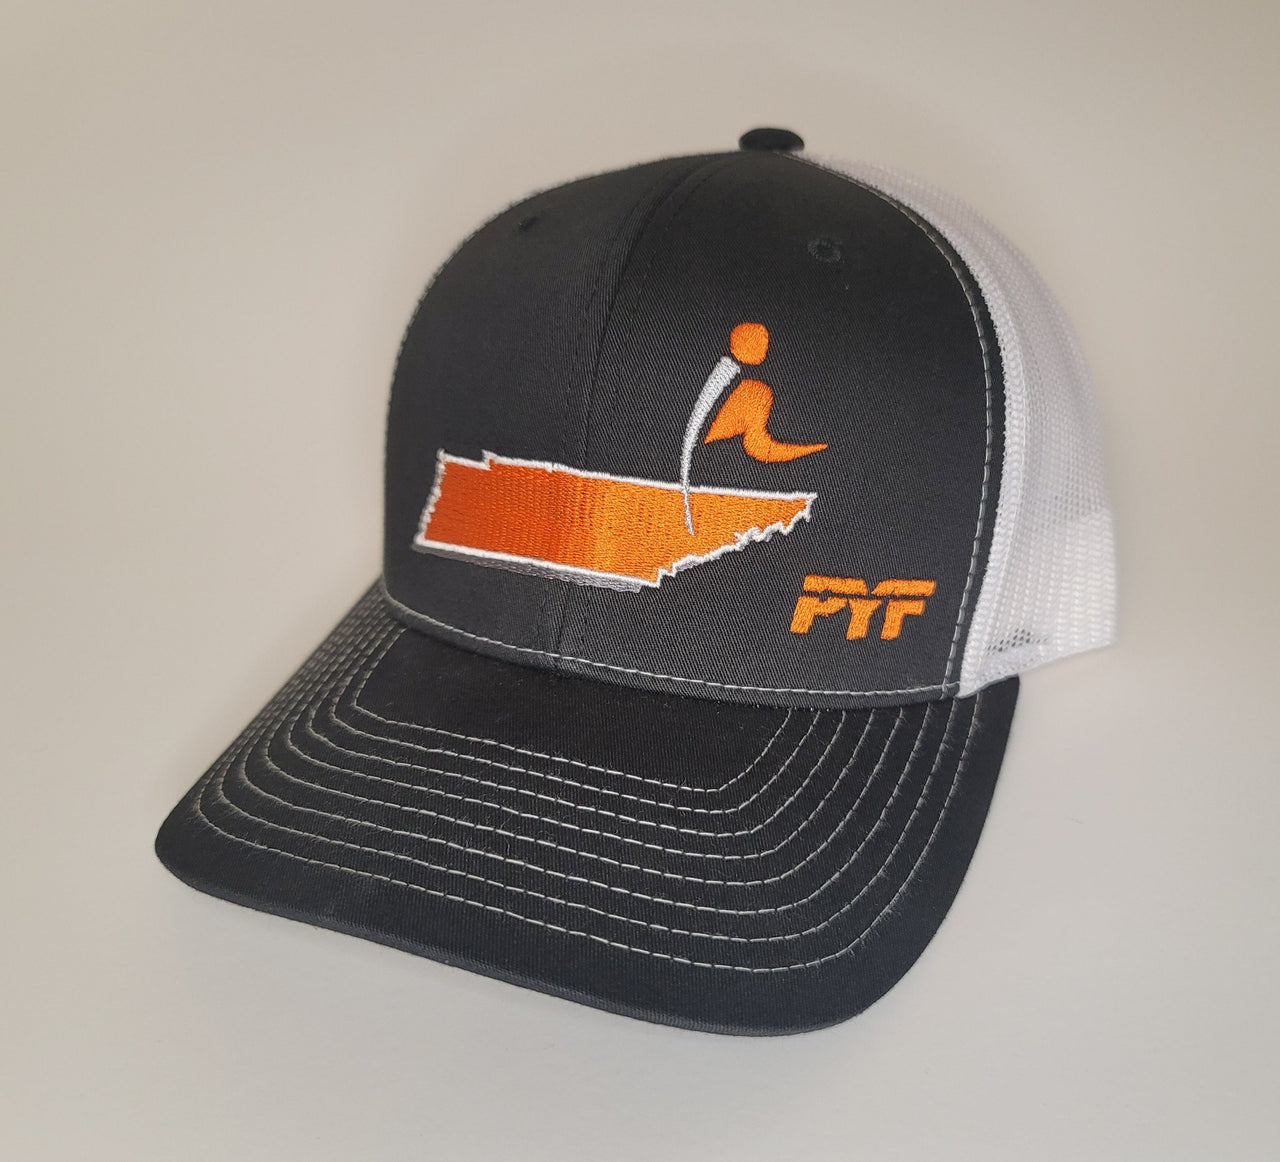 CXII Mesh Hat - Knoxville, Tennessee (Orange State/Black-White)